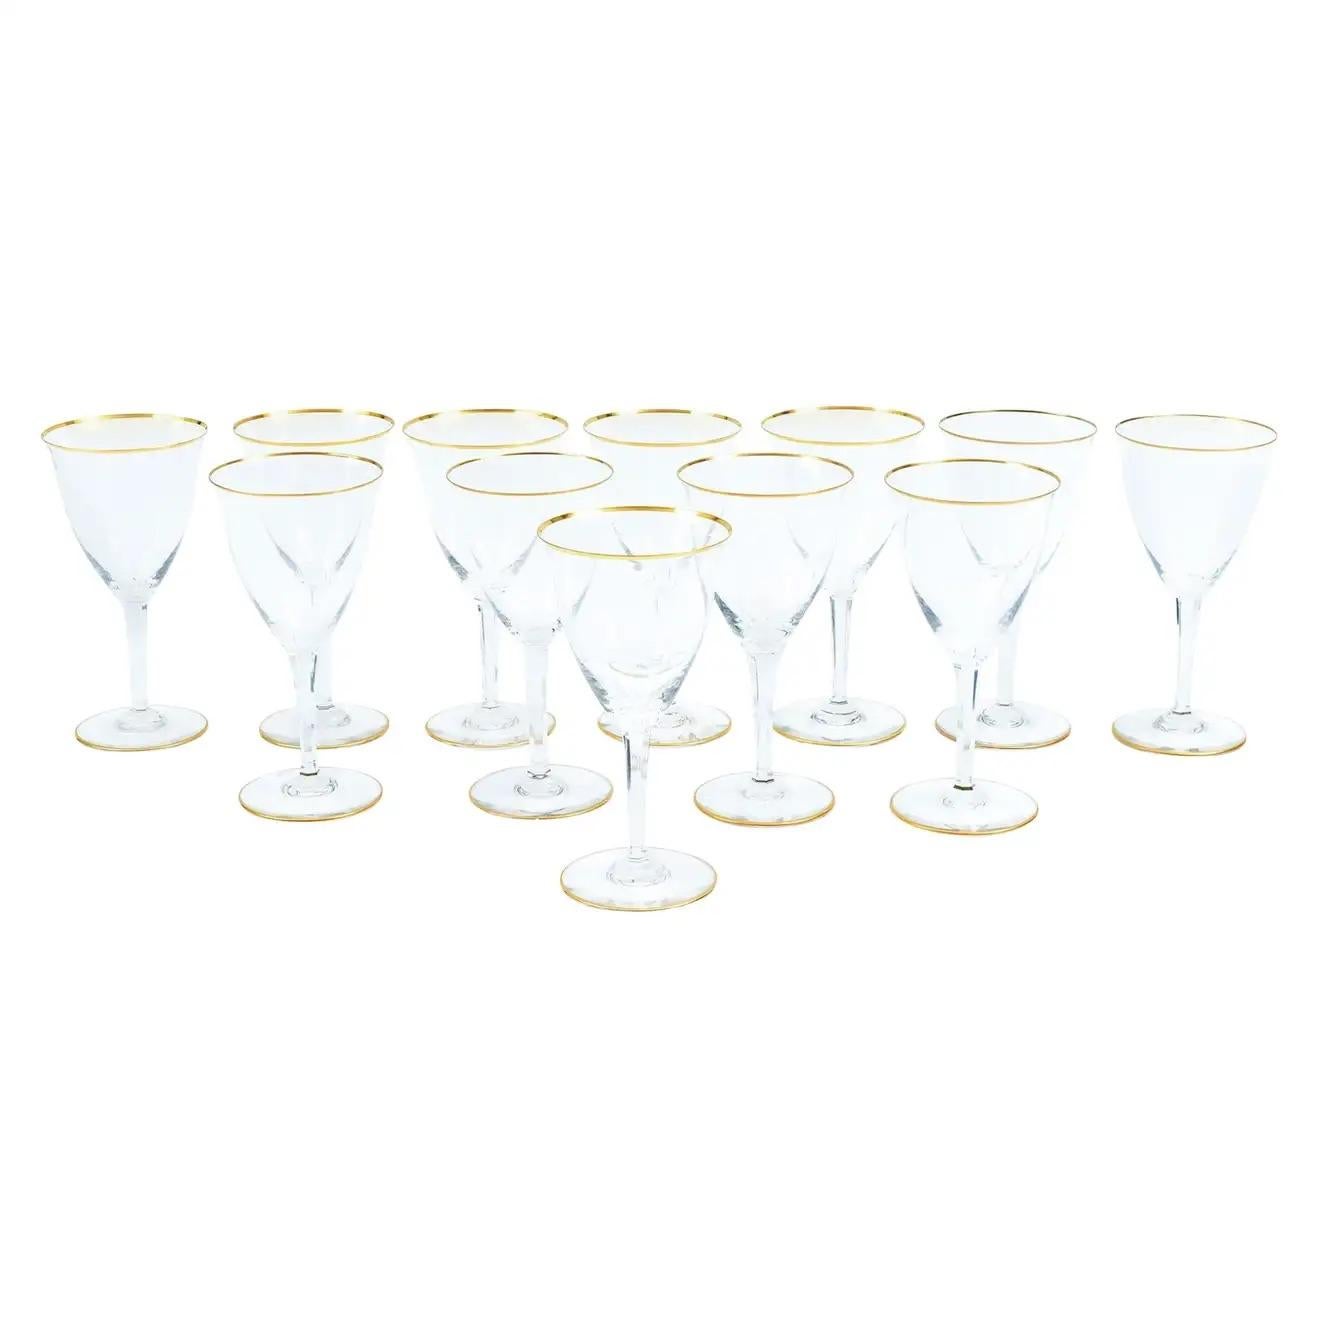 Large Baccarat crystal tableware / barware wine / water glassware service for twelve people with gilt gold trimmed top and base details. Each glass is in great vintage condition. Maker's mark etched underneath. Each glass measures 7. 3/4 inches tall